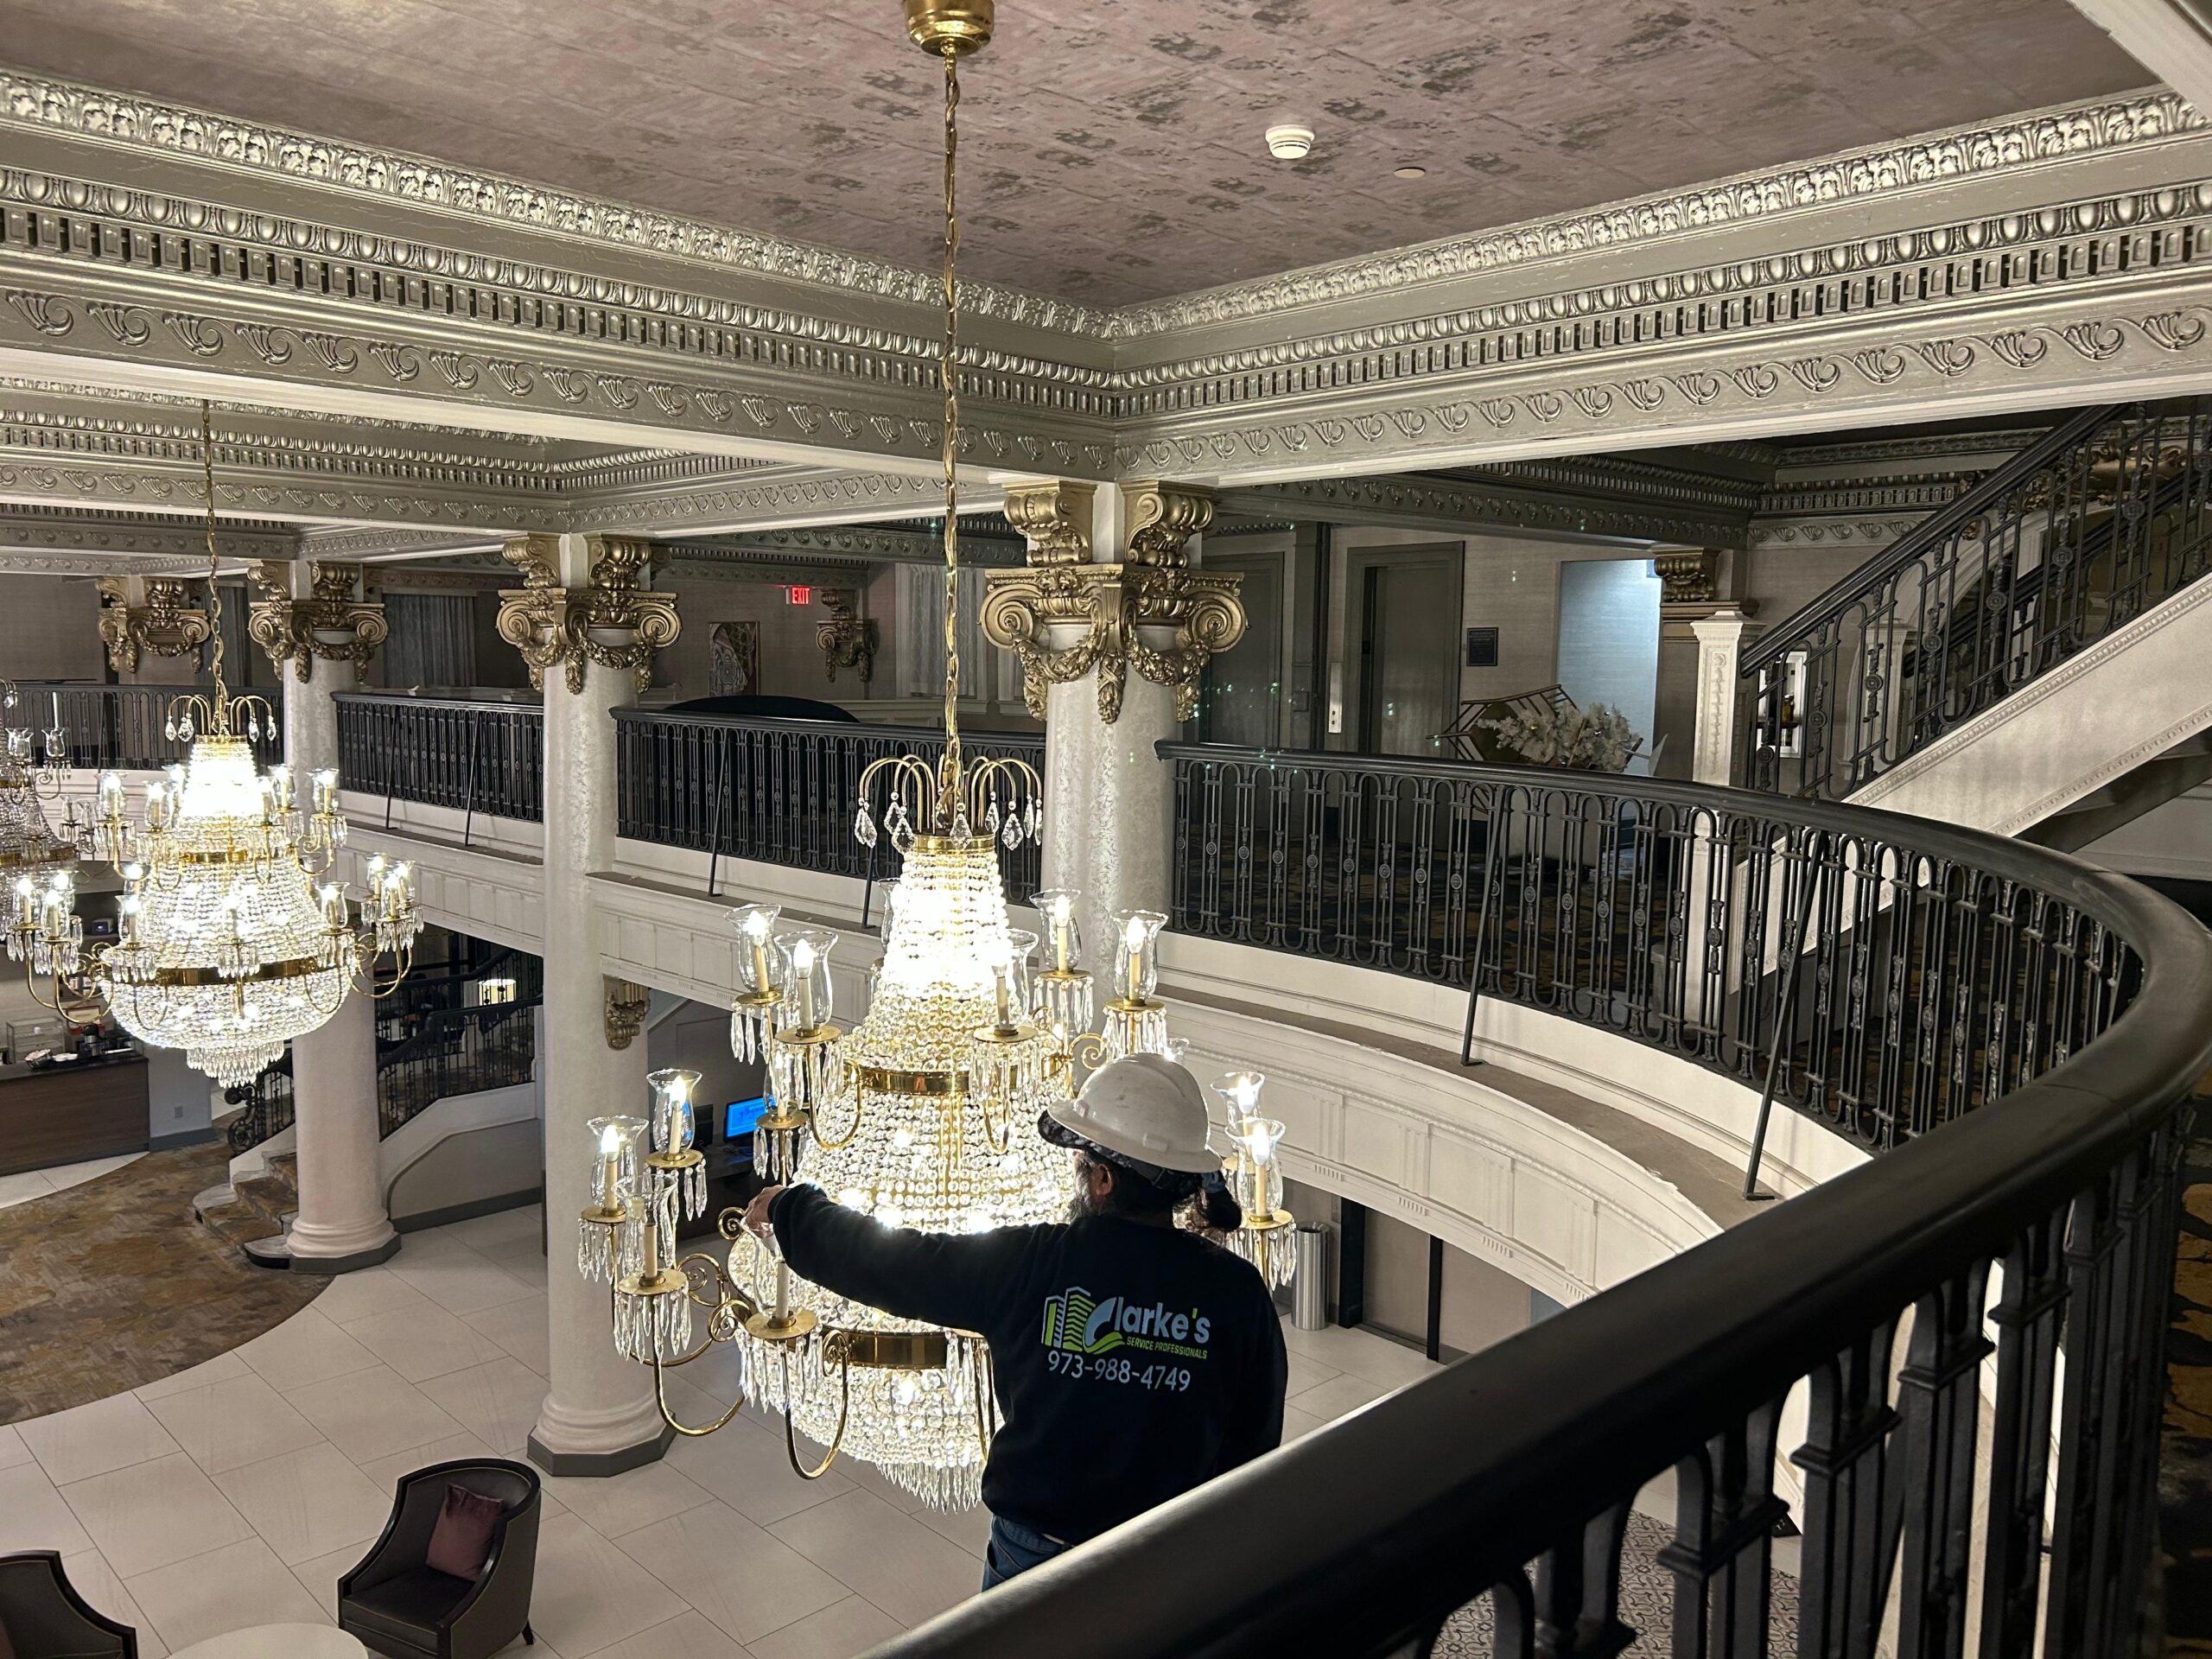 The Clarkes professional is standing on a ladder cleaning a large chandelier